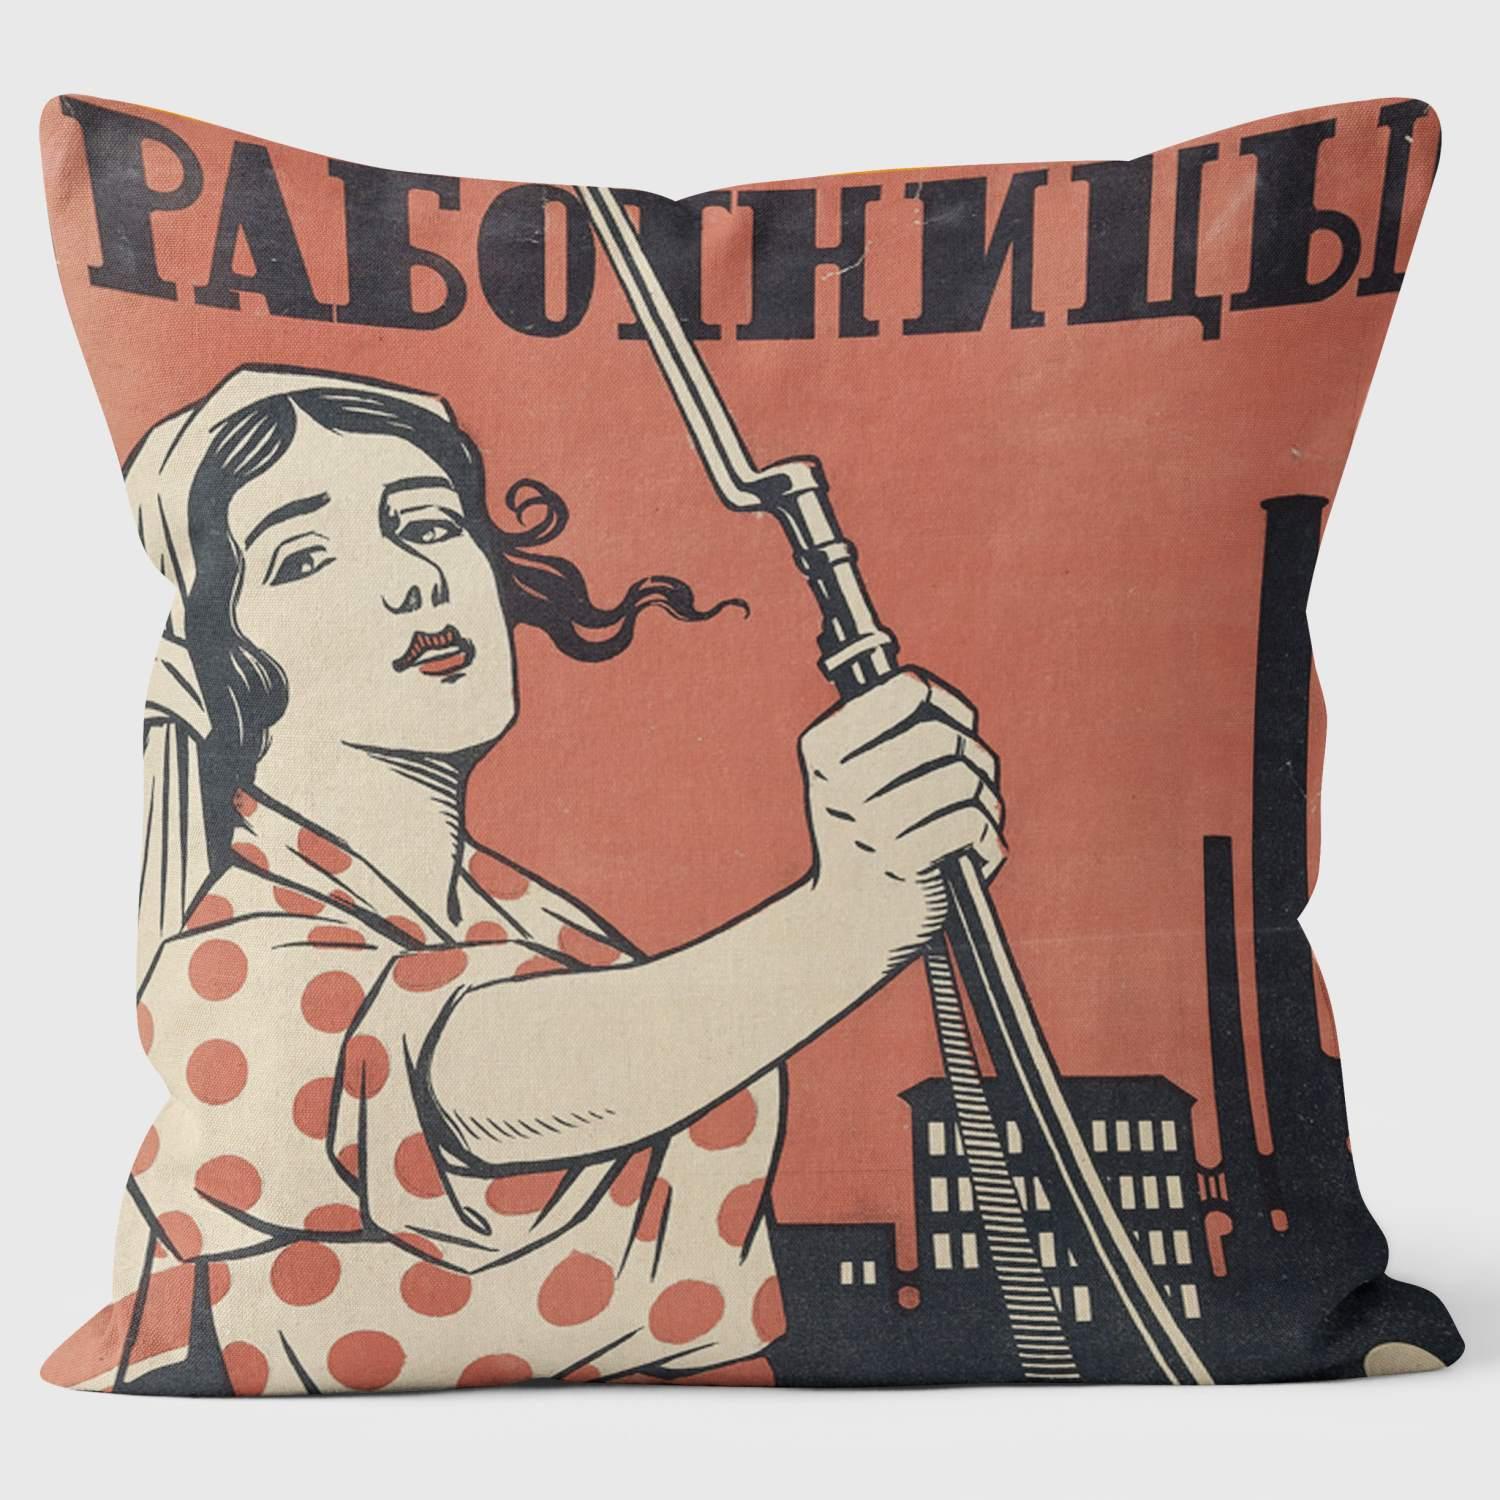 Women workers take up your Rifles - Tate - The Russian Revolution Cushion - Handmade Cushions UK - WeLoveCushions